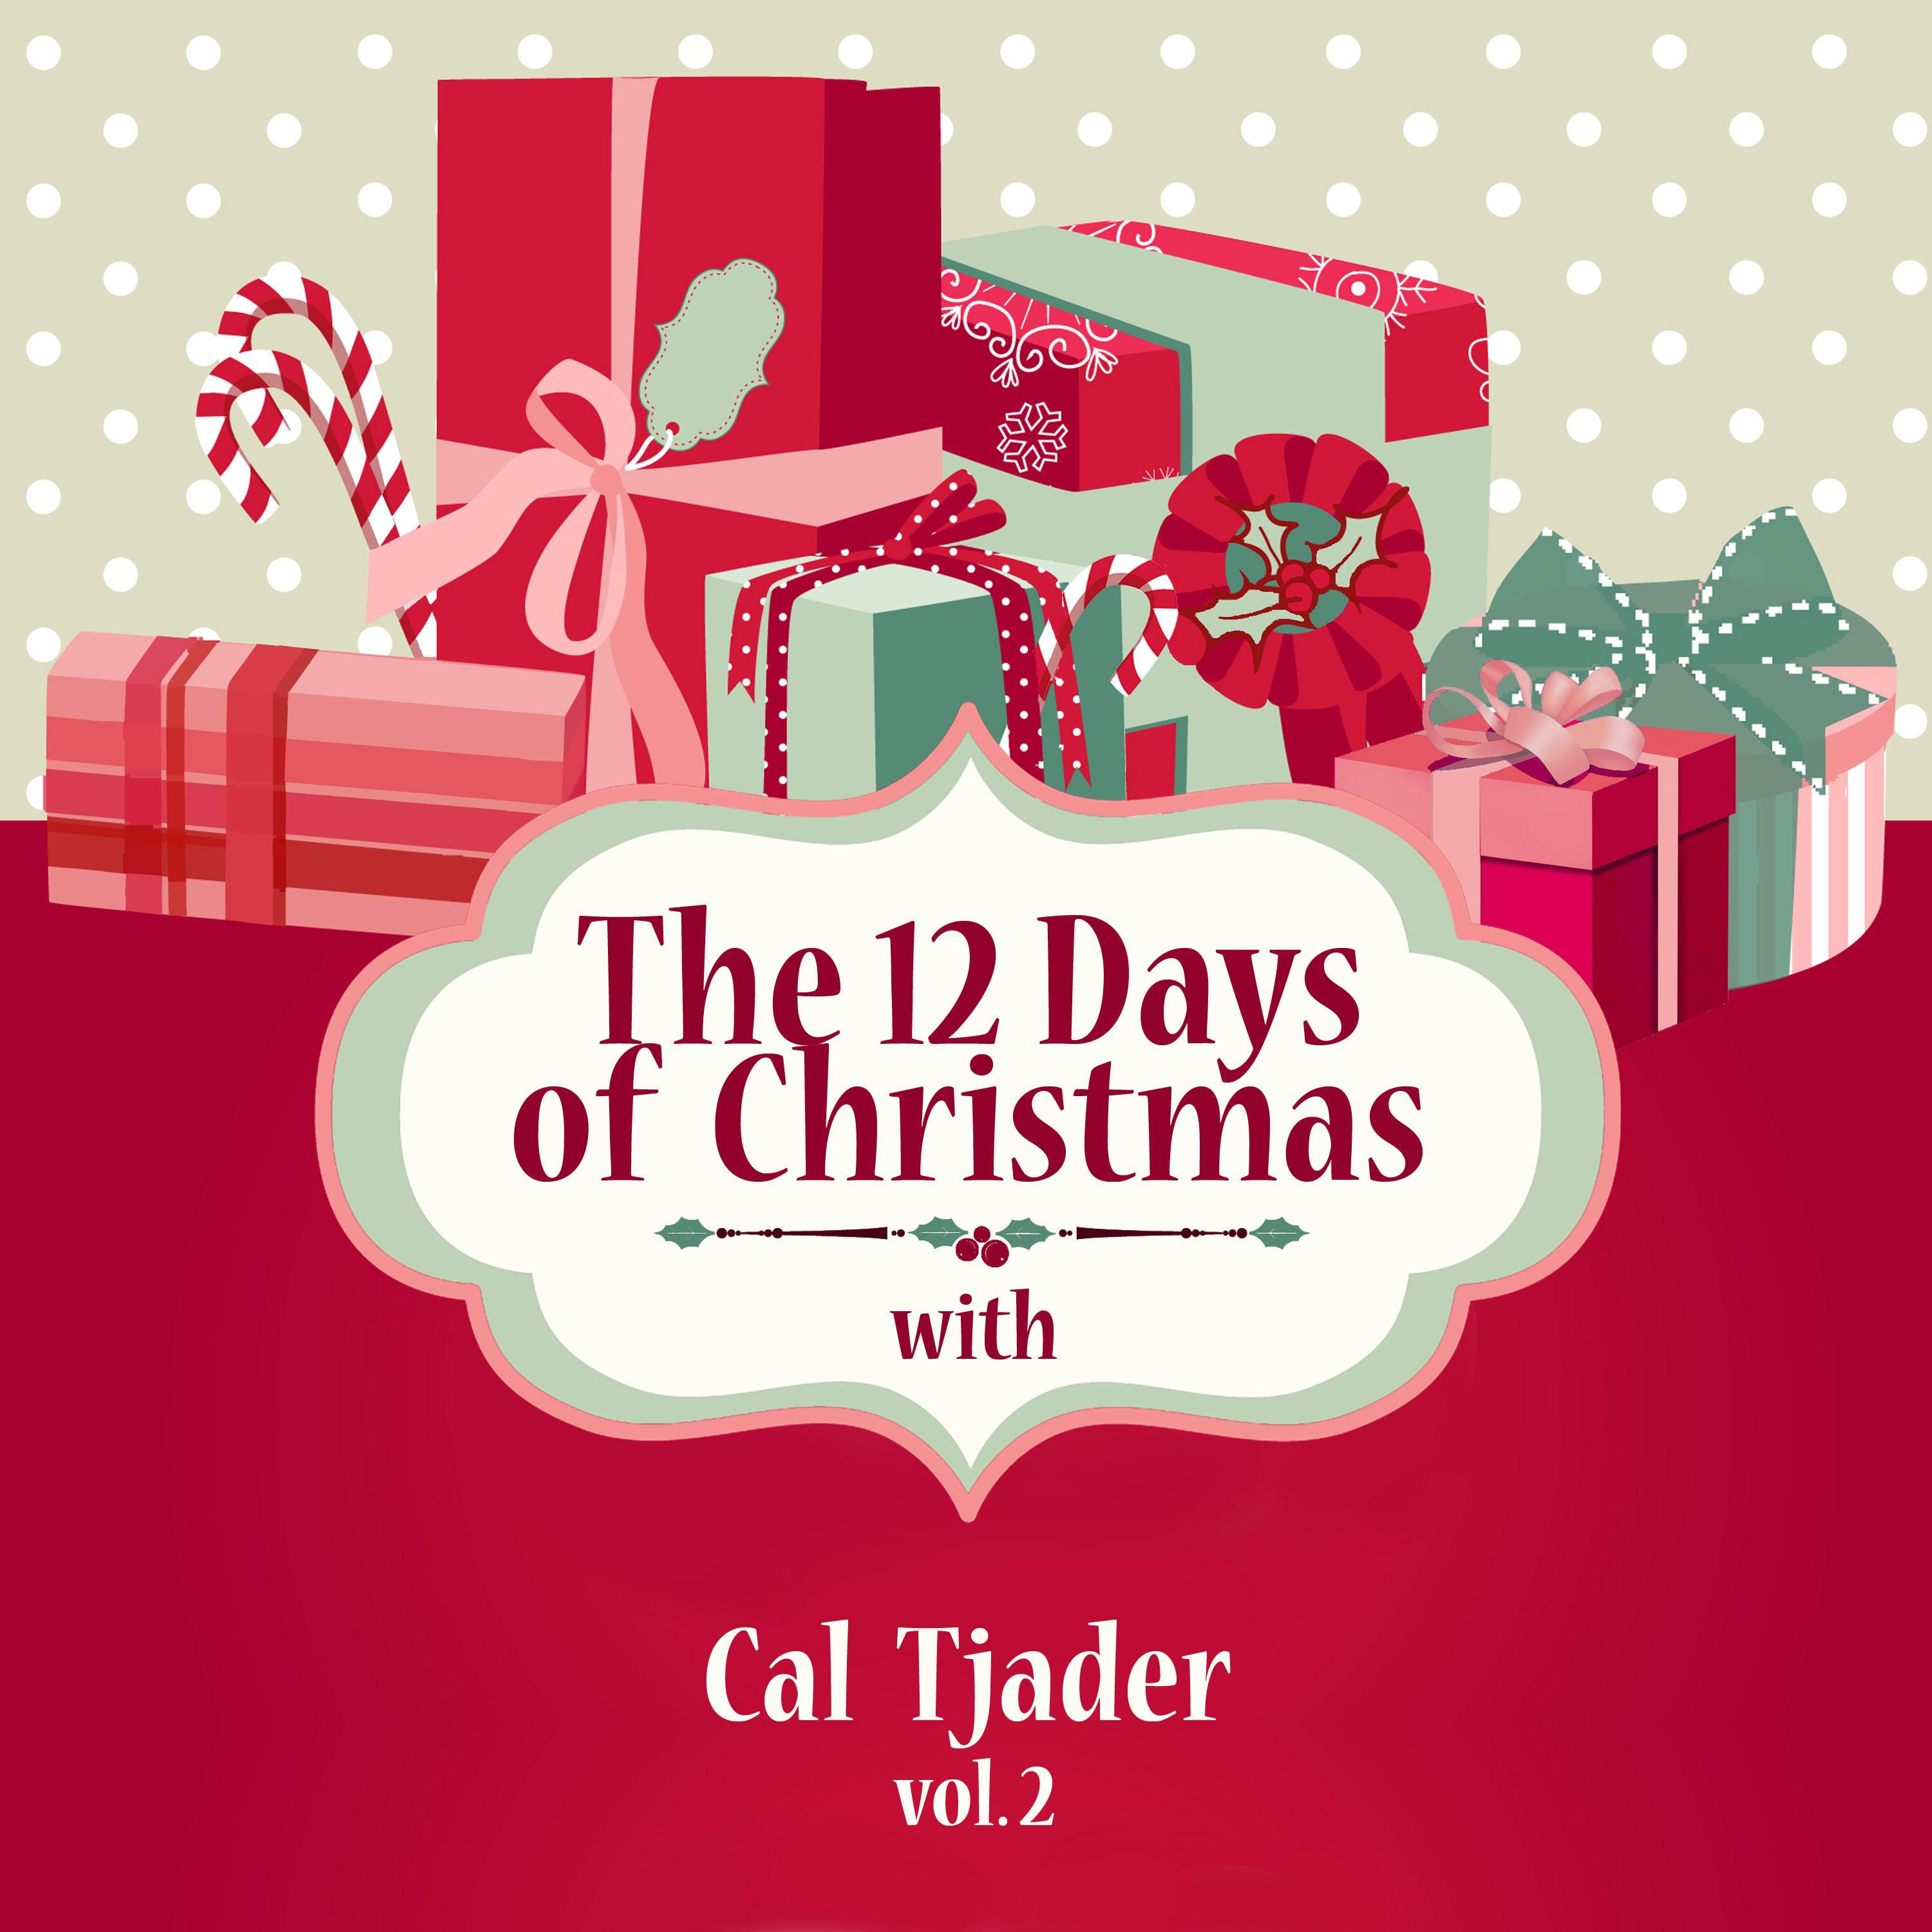 The 12 Days of Christmas with Cal Tjader, Vol. 2